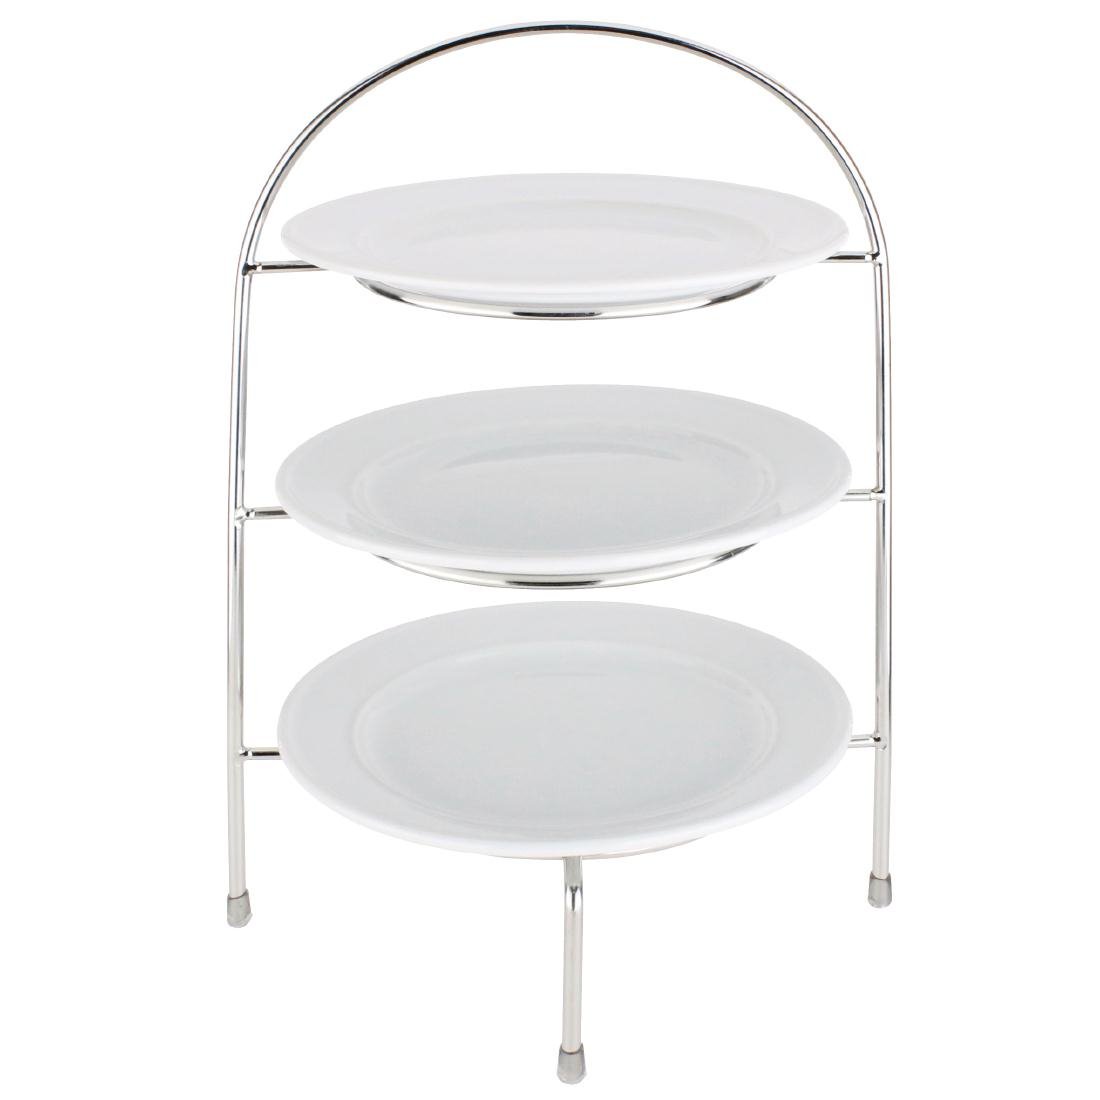 Afternoon Tea Stand for Plates Up To 210mm